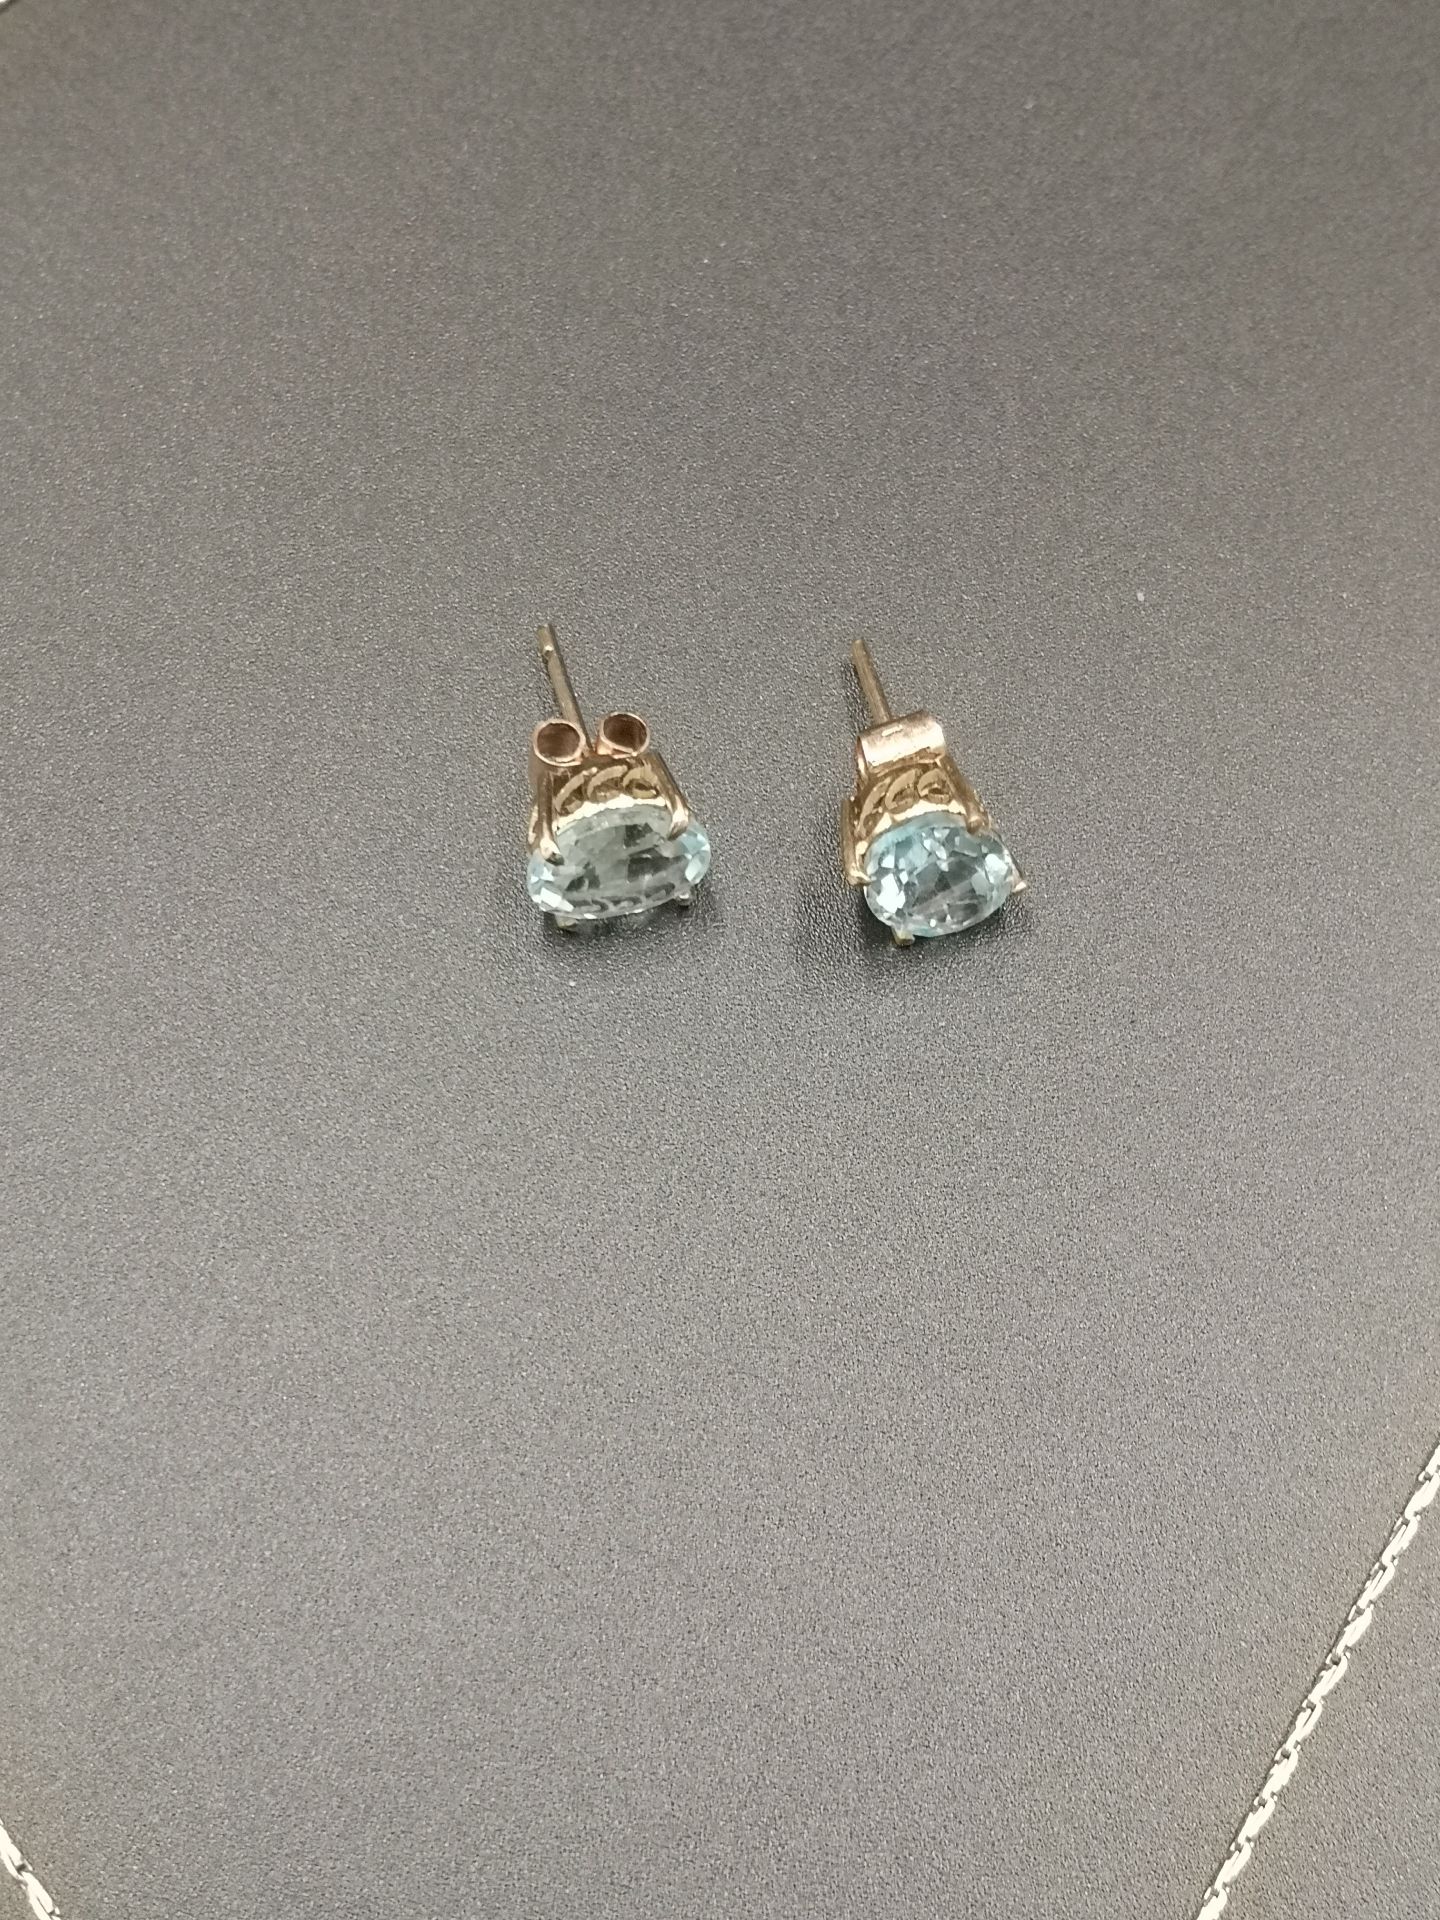 14ct gold and blue topaz earrings - Image 3 of 6